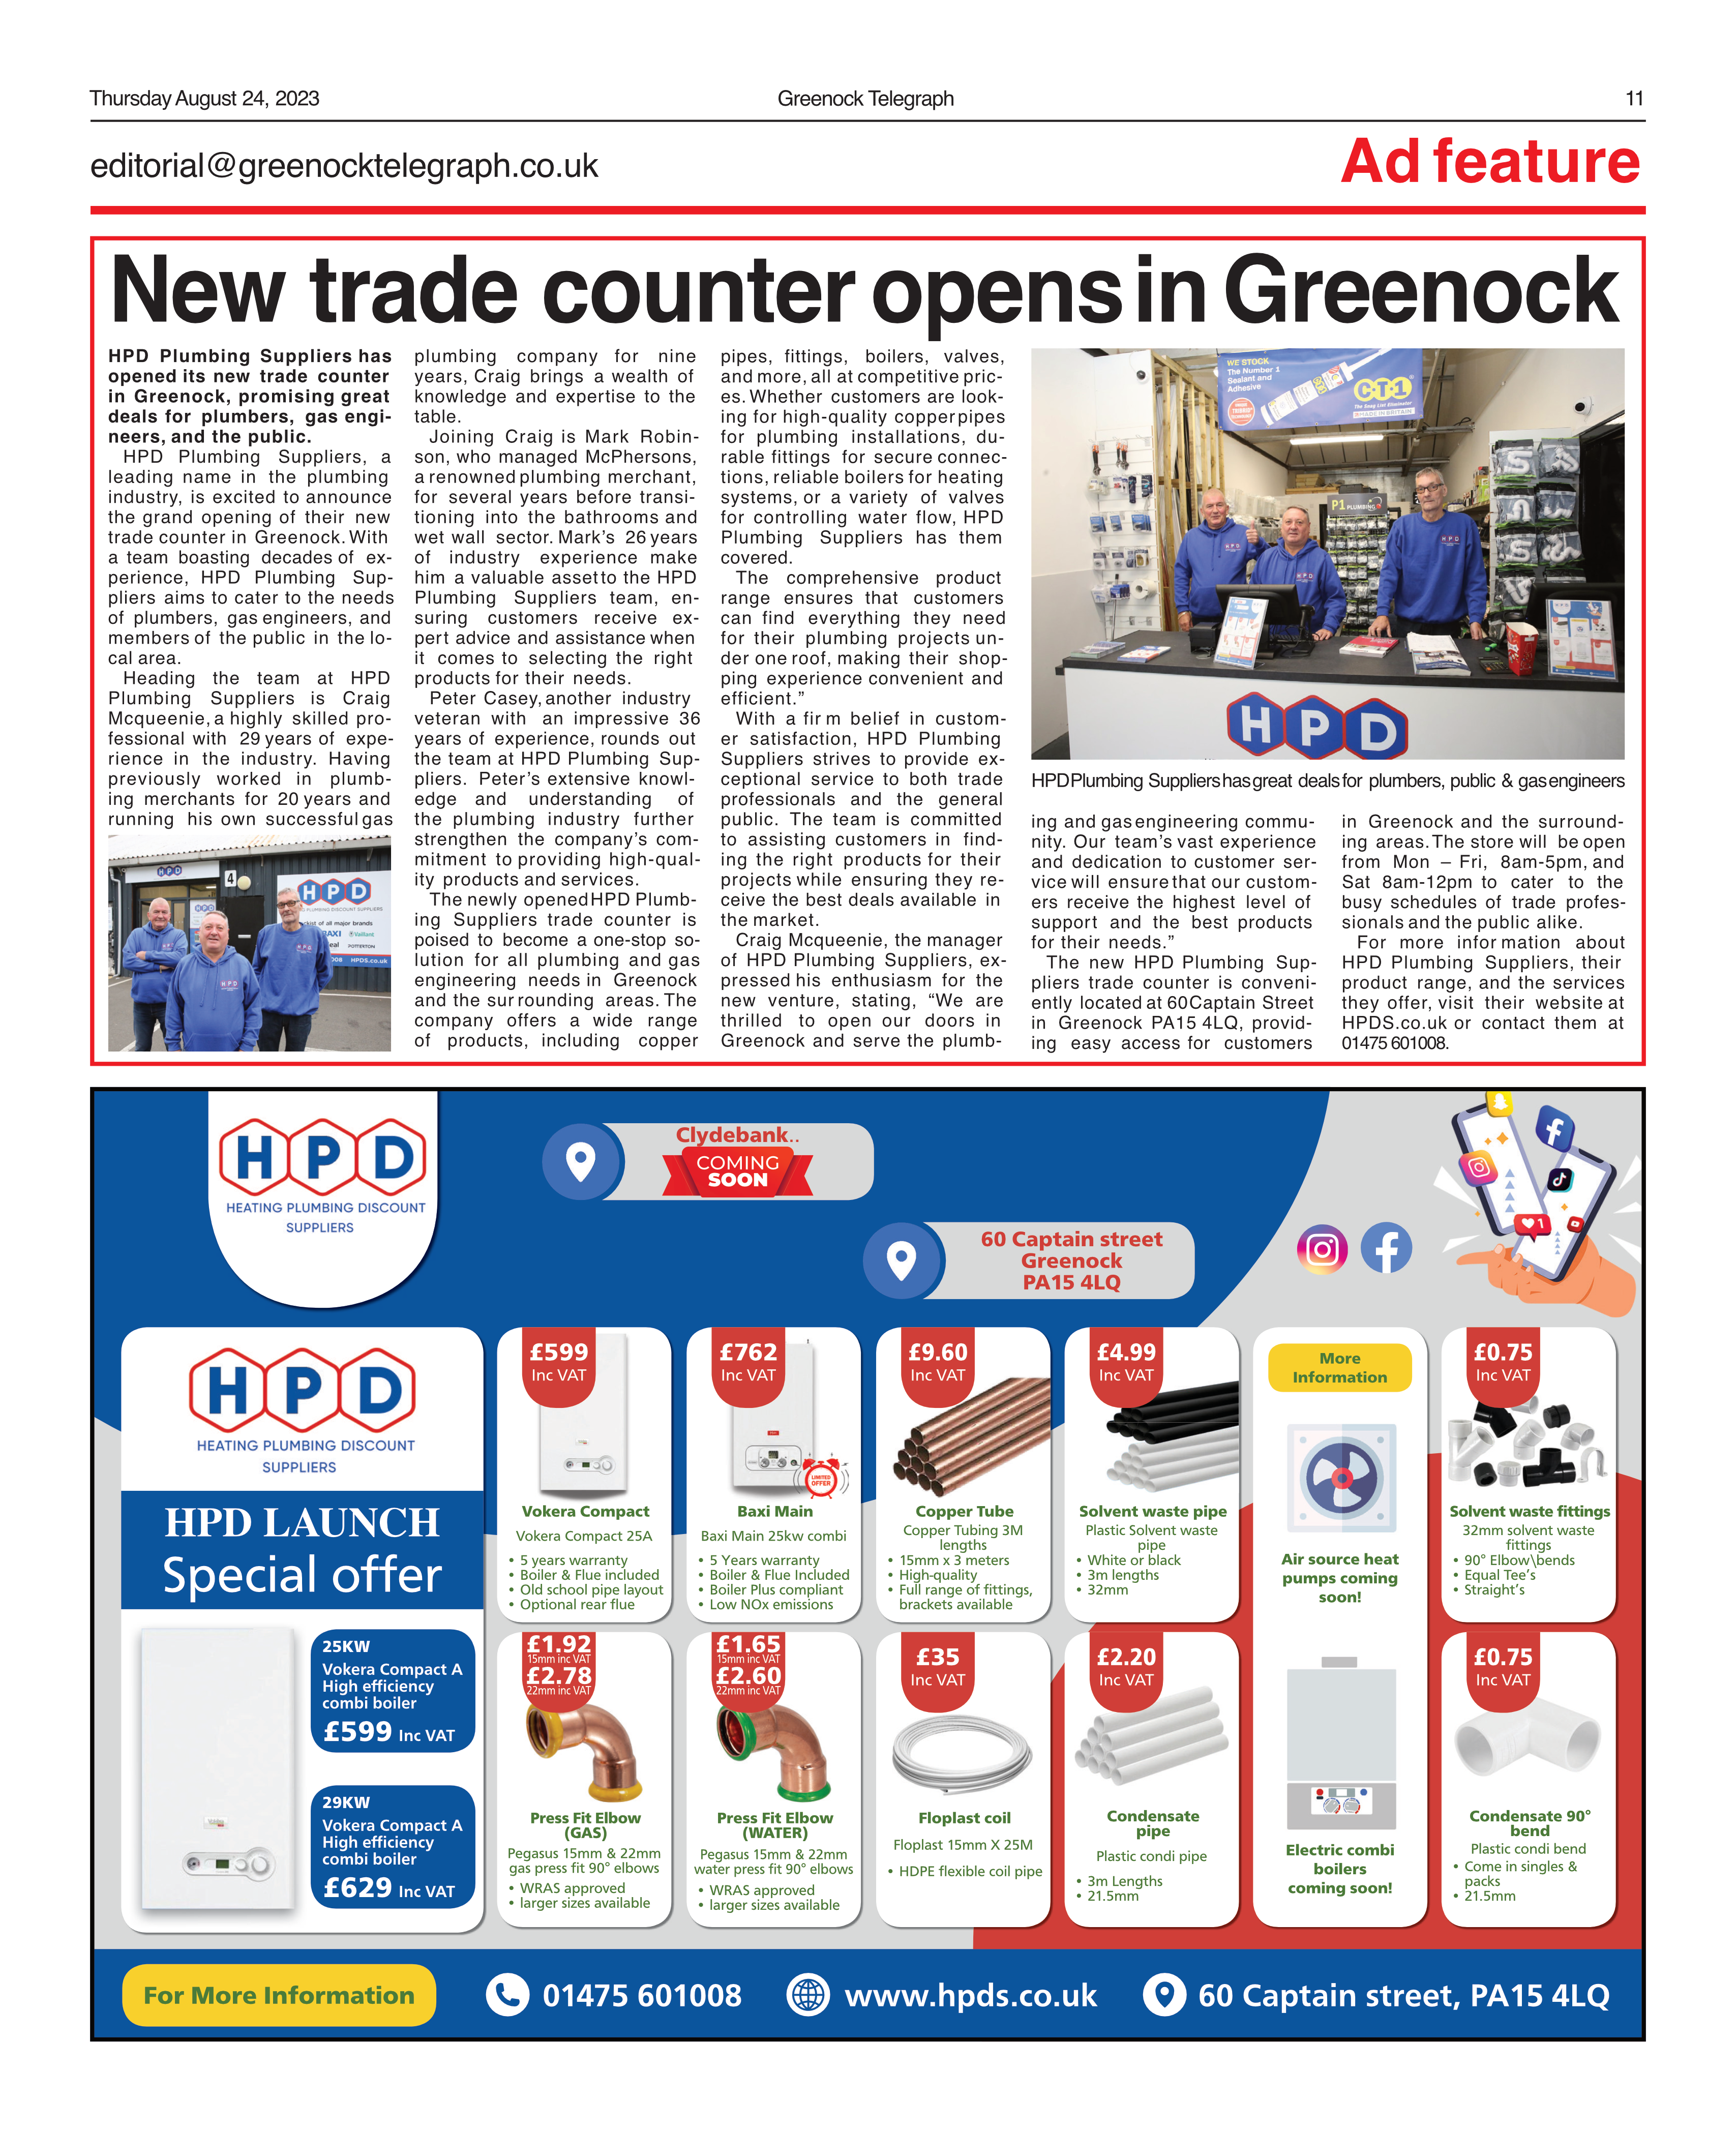 HPD Plumbing Suppliers has opened its new trade counter in Greenock.